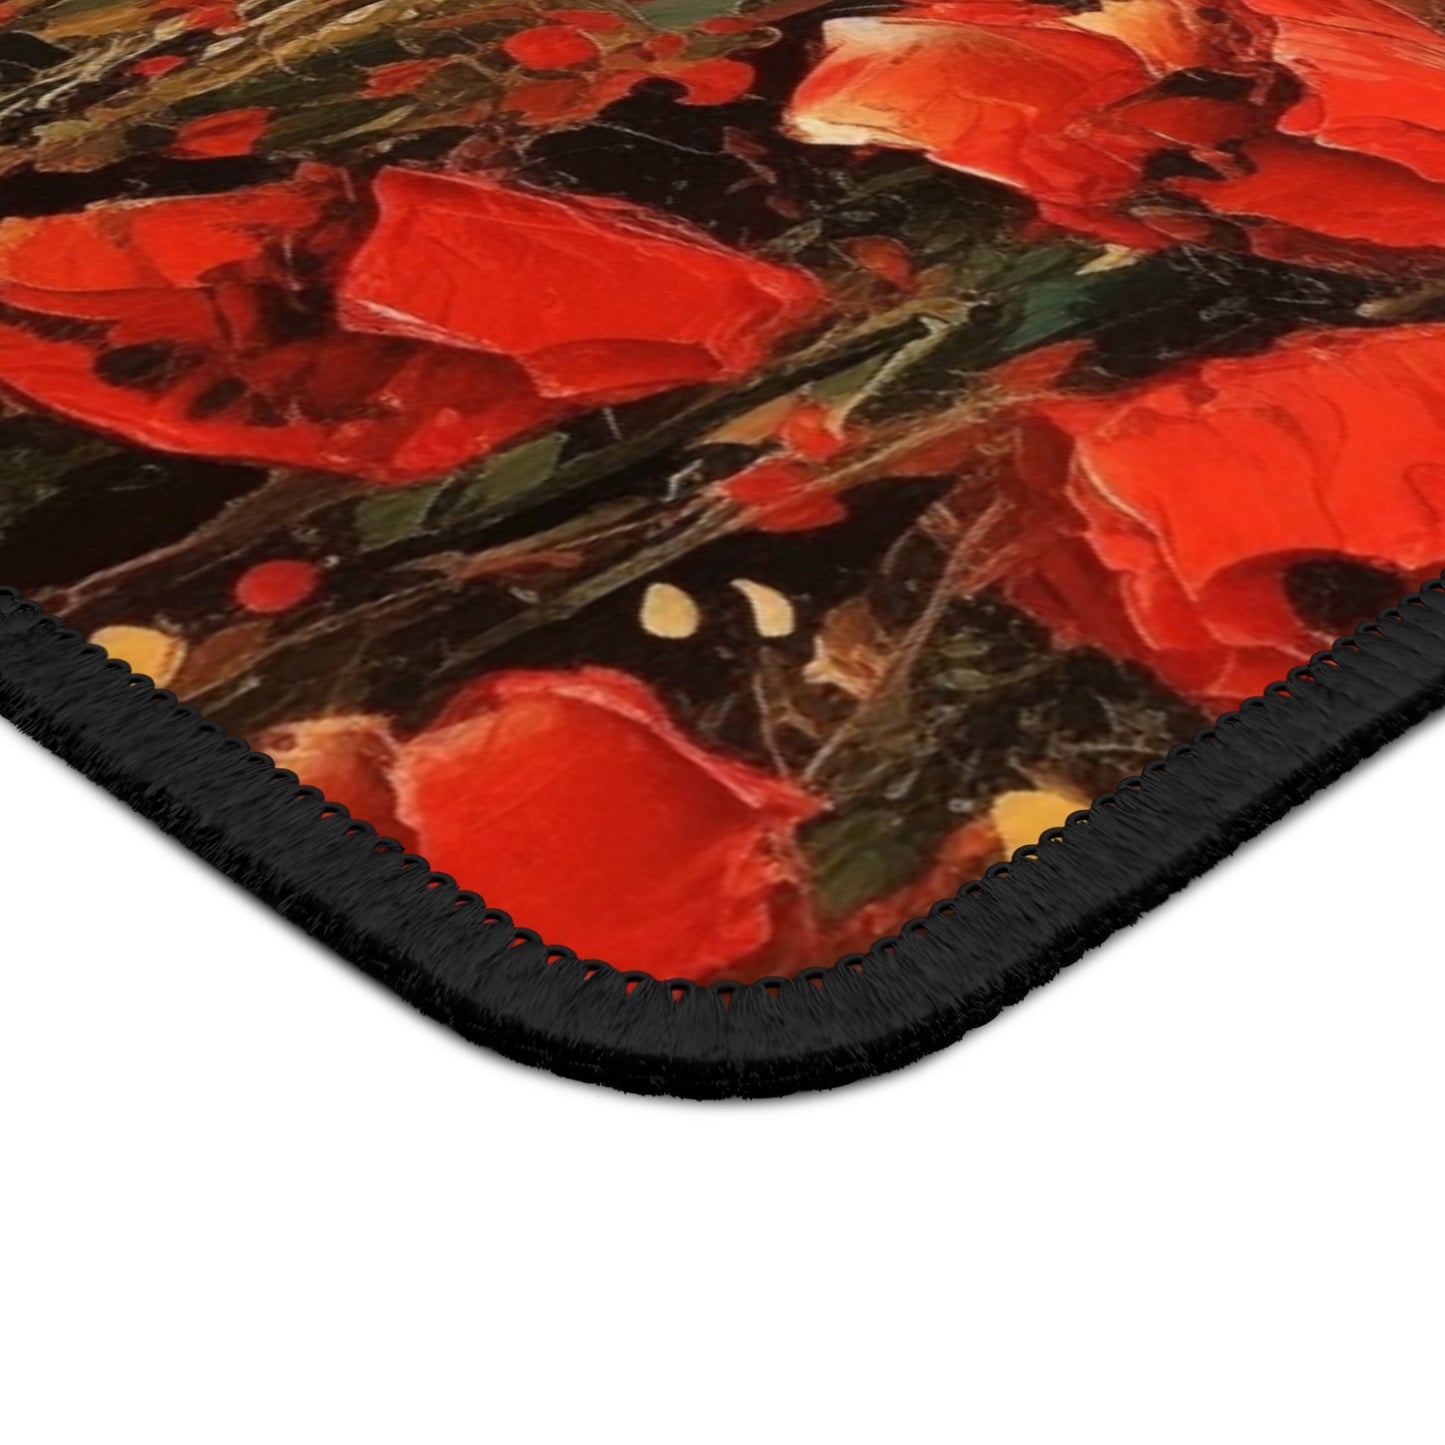 Abstract Poppy Fields: Gaming Mouse Pad for Artistic Inspiration